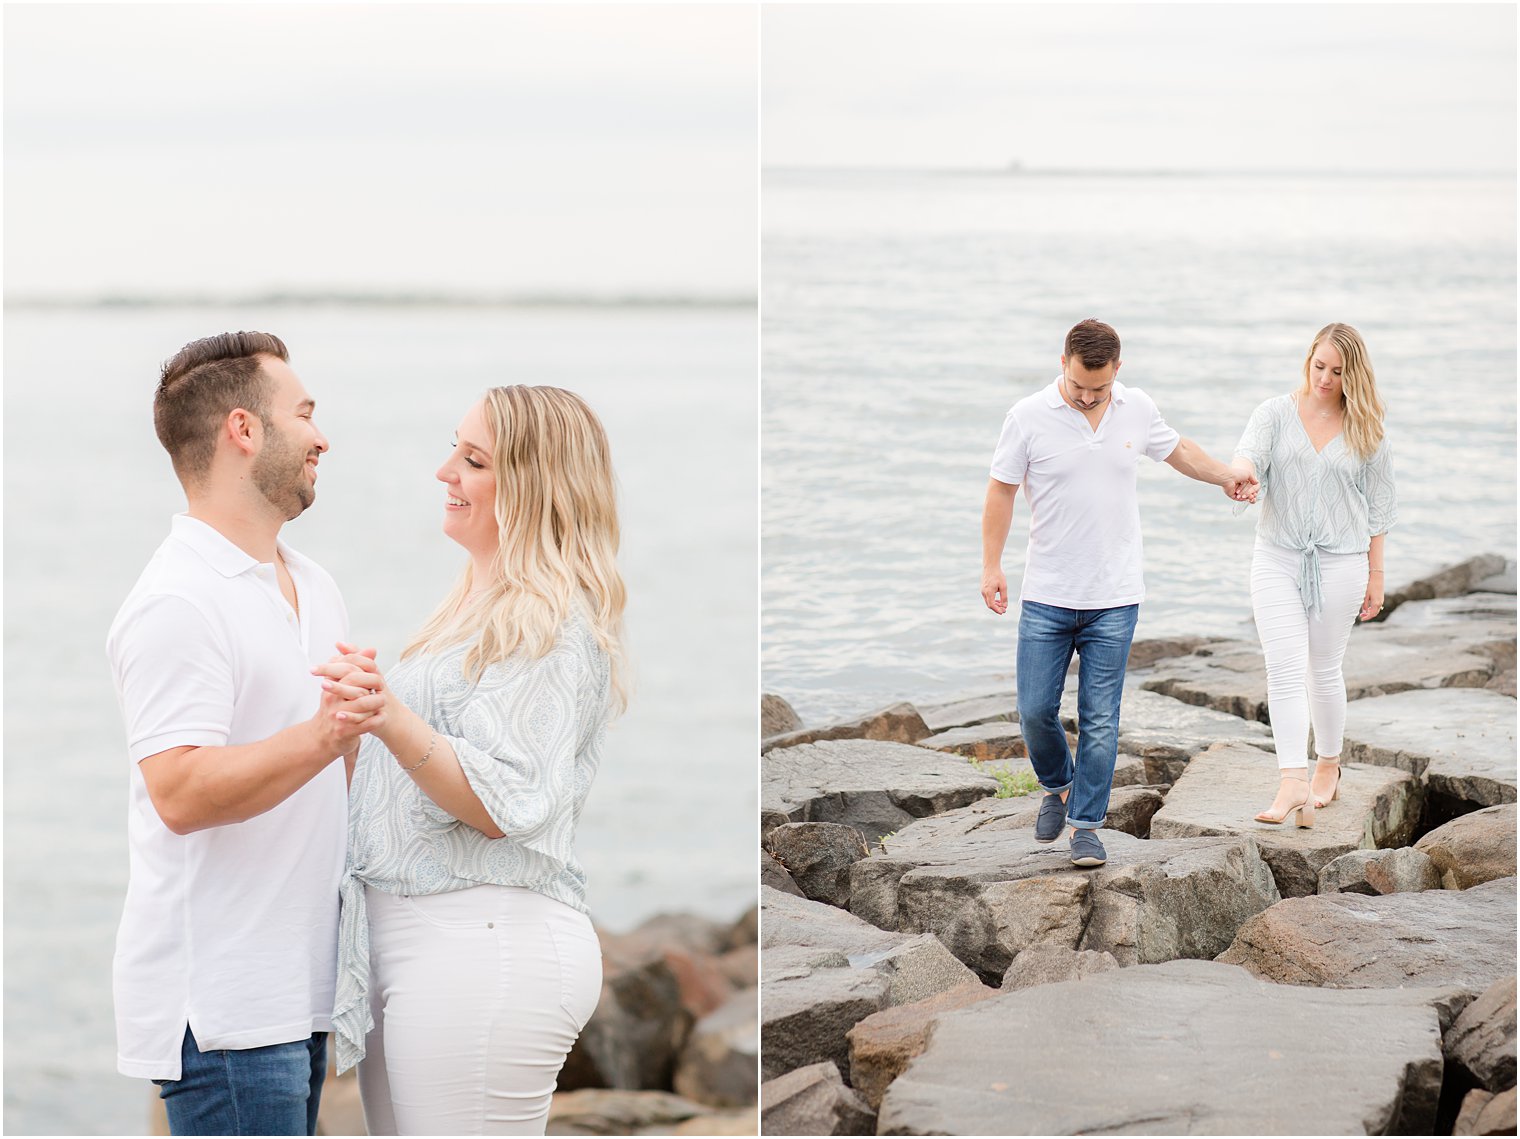 New Jersey engagement session with Idalia Photography